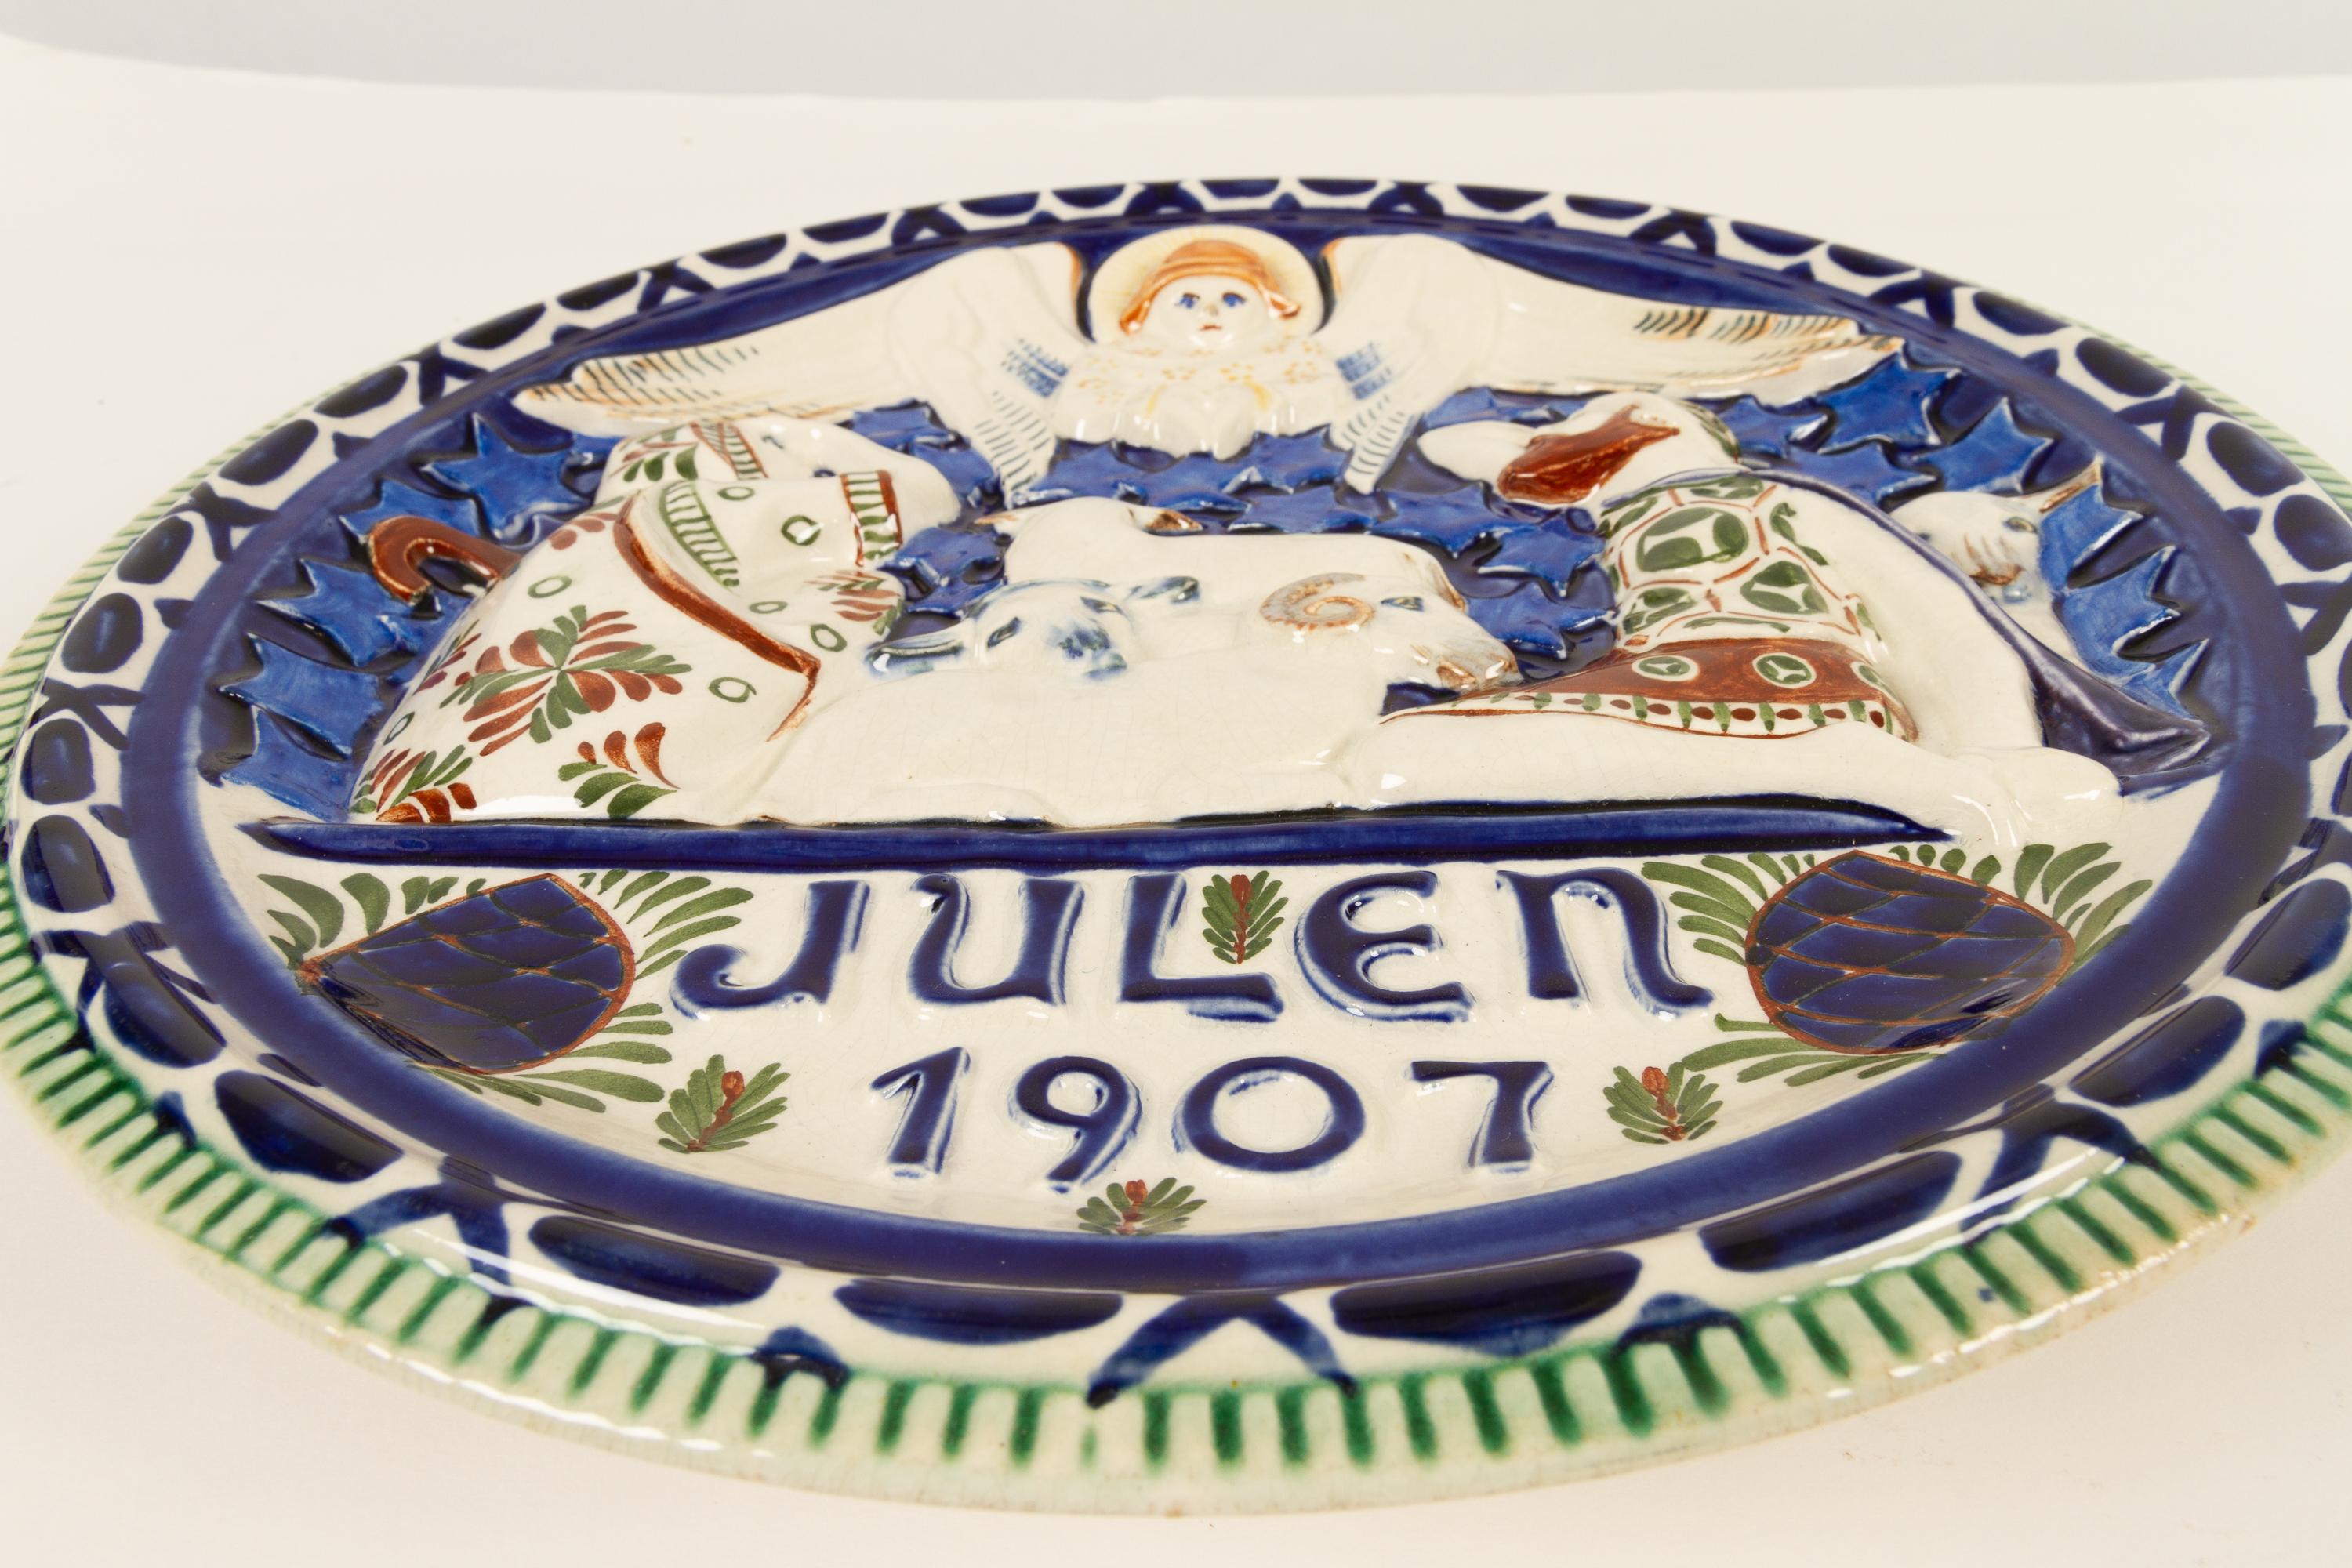 Antique Danish Christmas Porcelain decorative plate by Aluminia 1907.
Large Christmas plate by Aluminia ( later Royal Copenhagen ) in hand painted faience. The word 